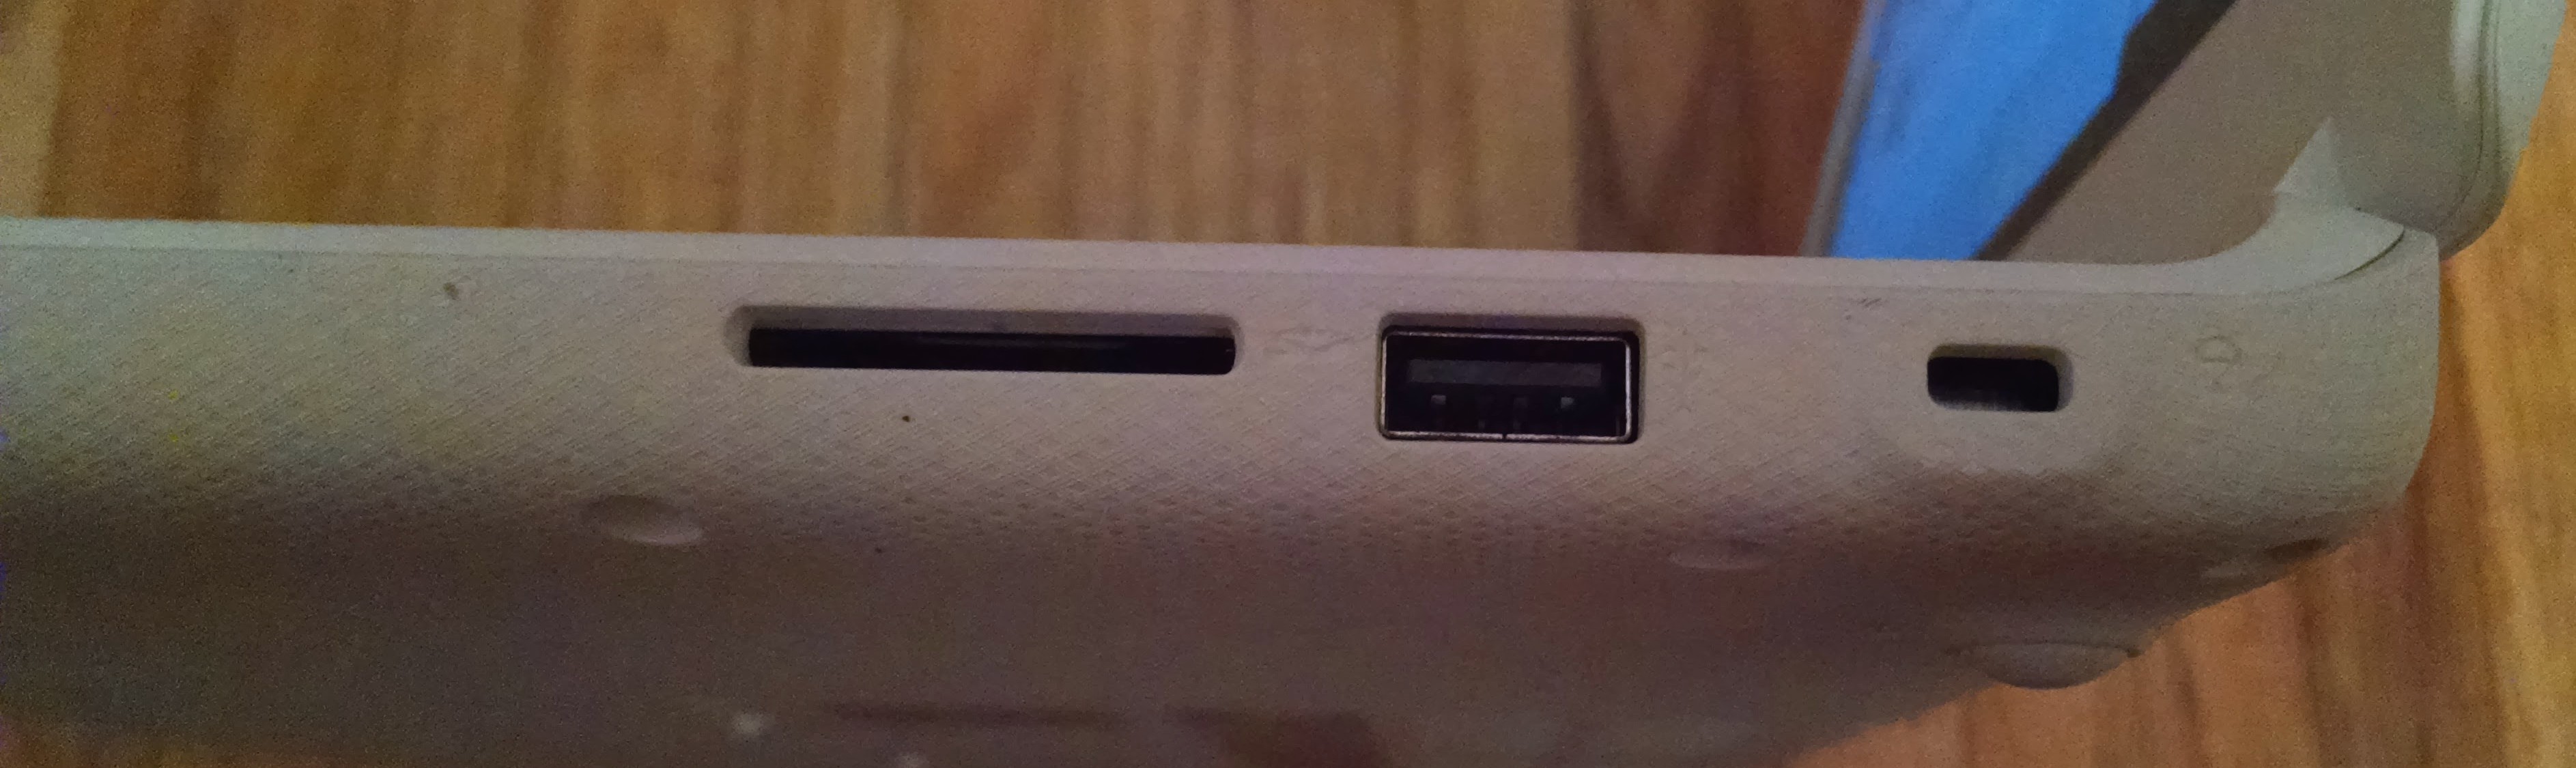 Right-side ports: SD Card, USB-2